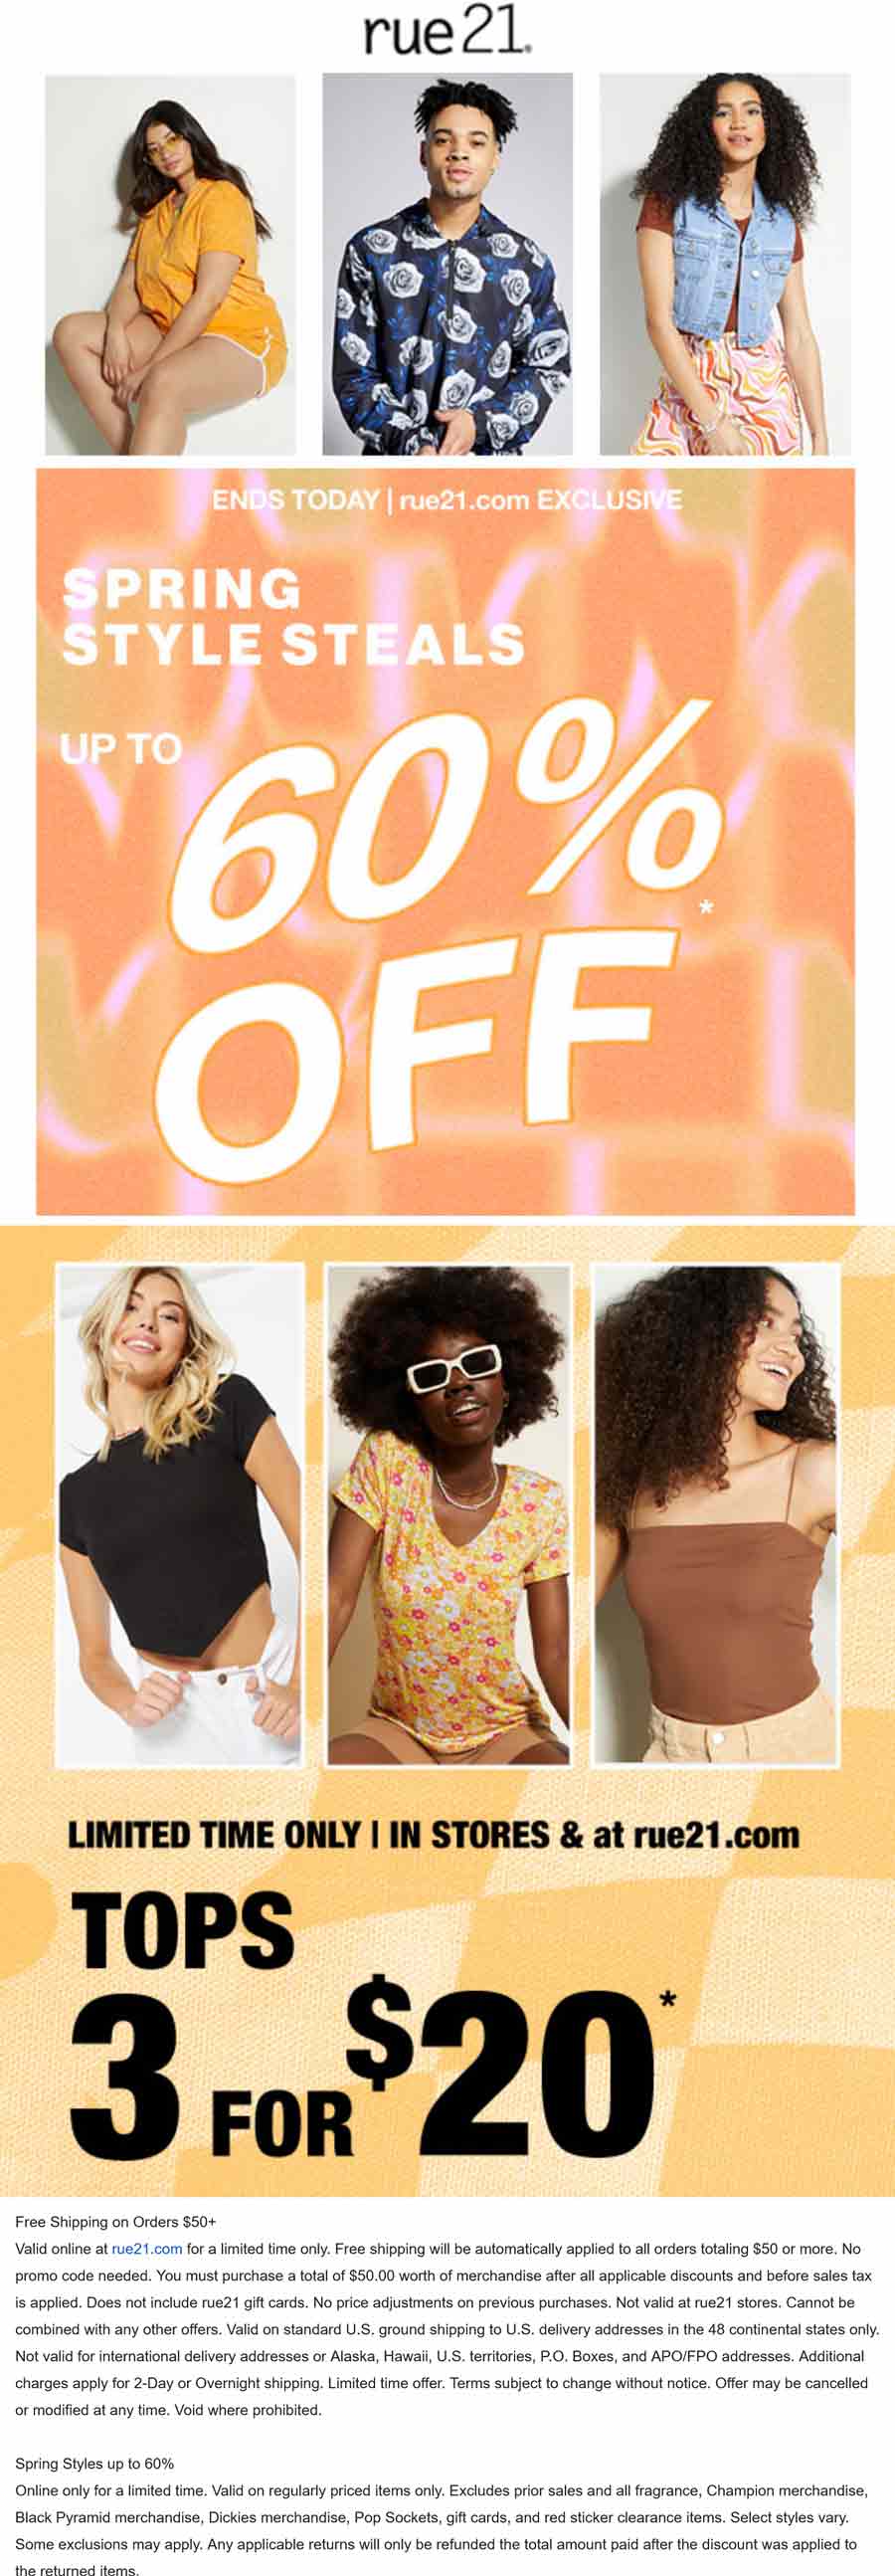 rue21 stores Coupon  Tops are 3 for $20 at rue21, ditto online #rue21 